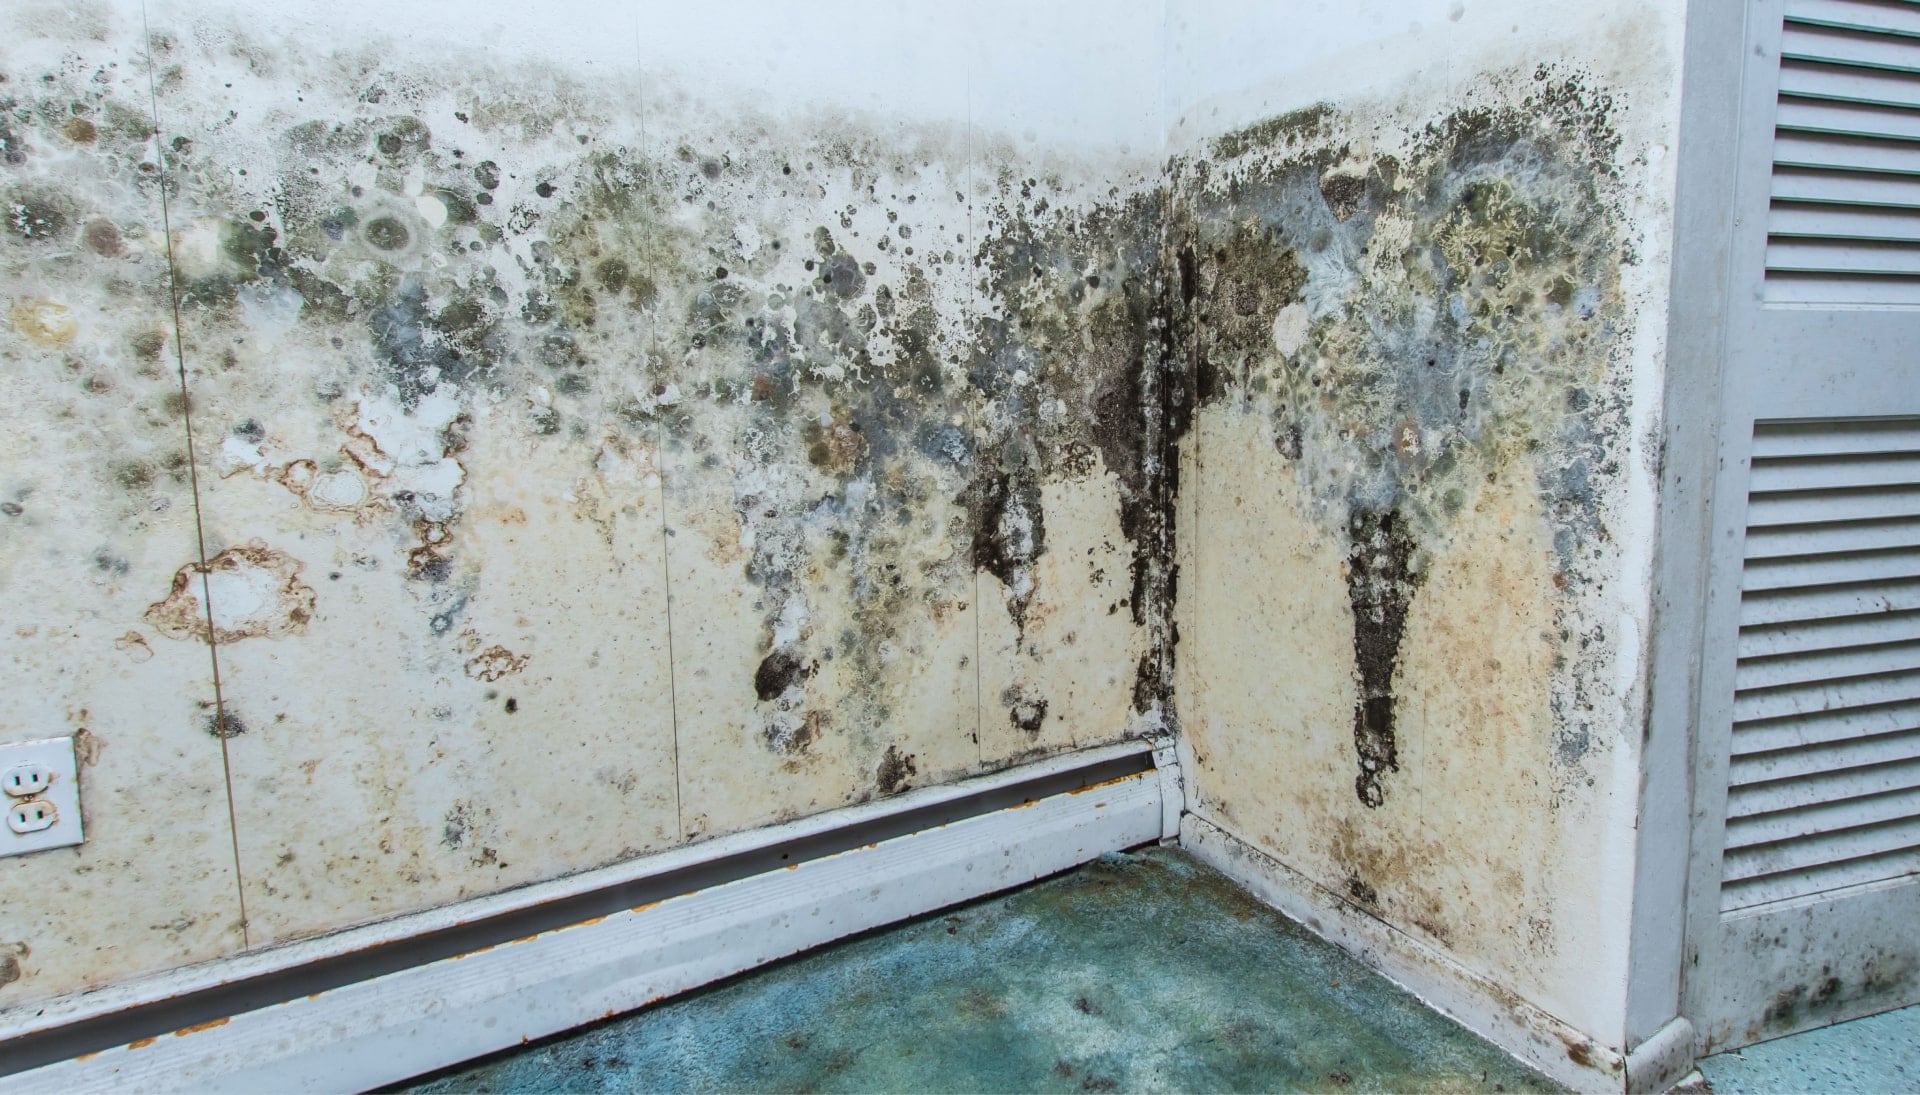 A mold remediation team using specialized techniques to remove mold damage and control odors in a Plantation property, with a focus on safety and efficiency